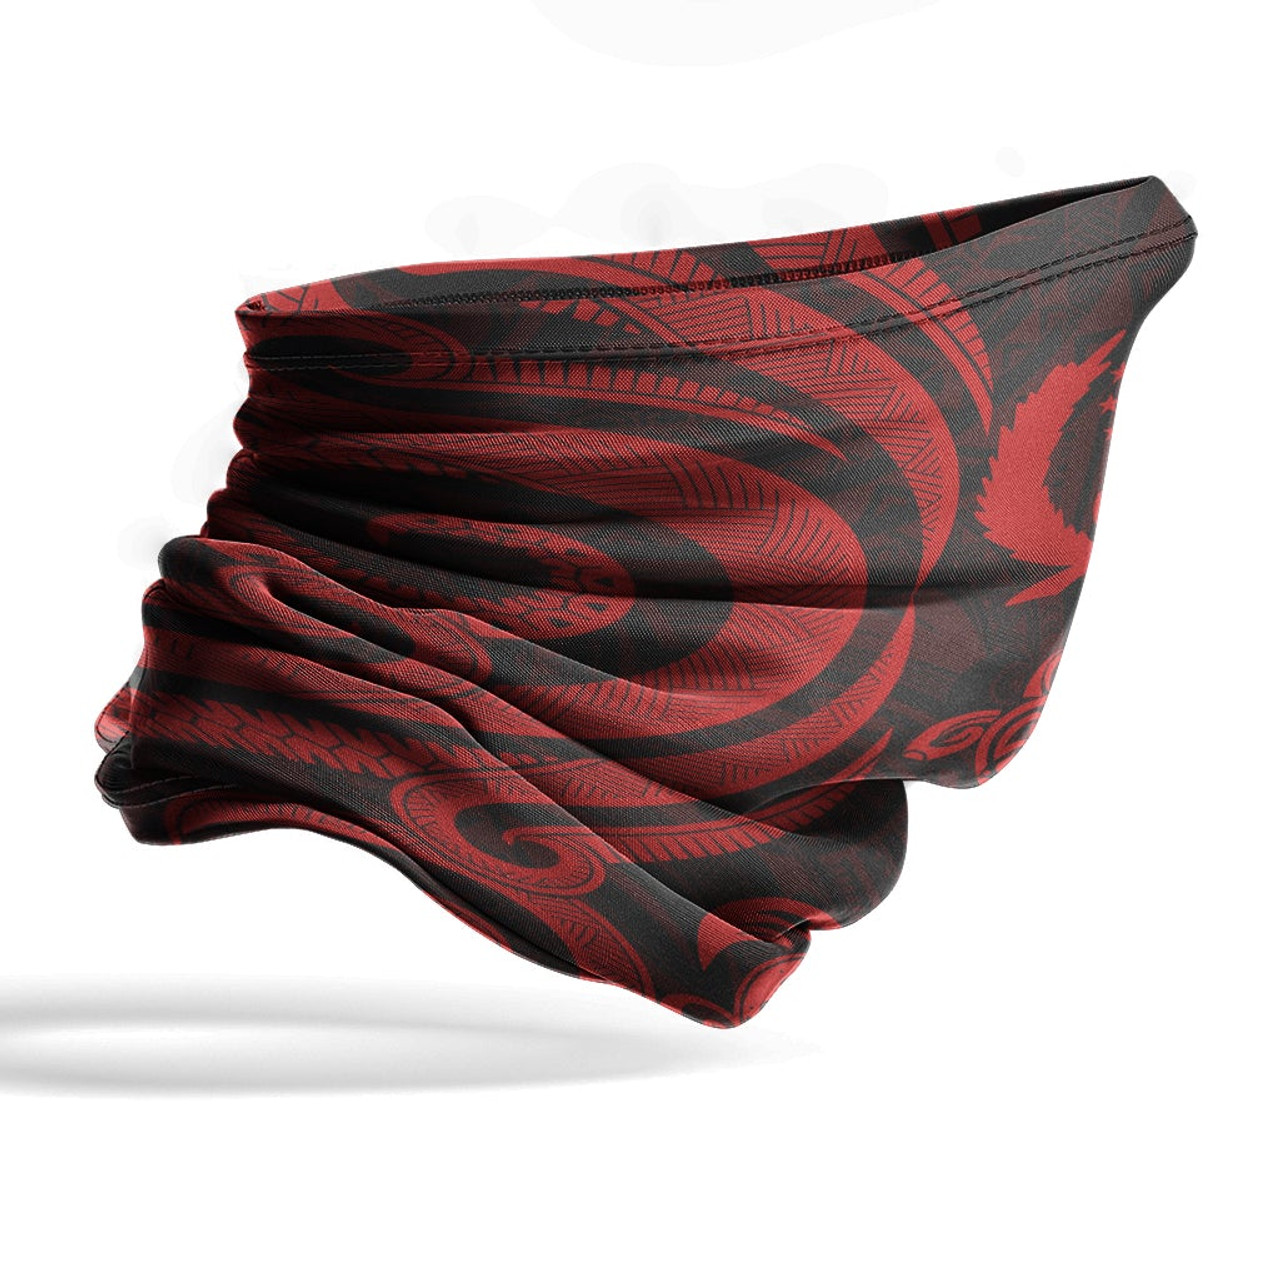 Pohnpei Neck Gaiter - Turtle Tentacle Red 4